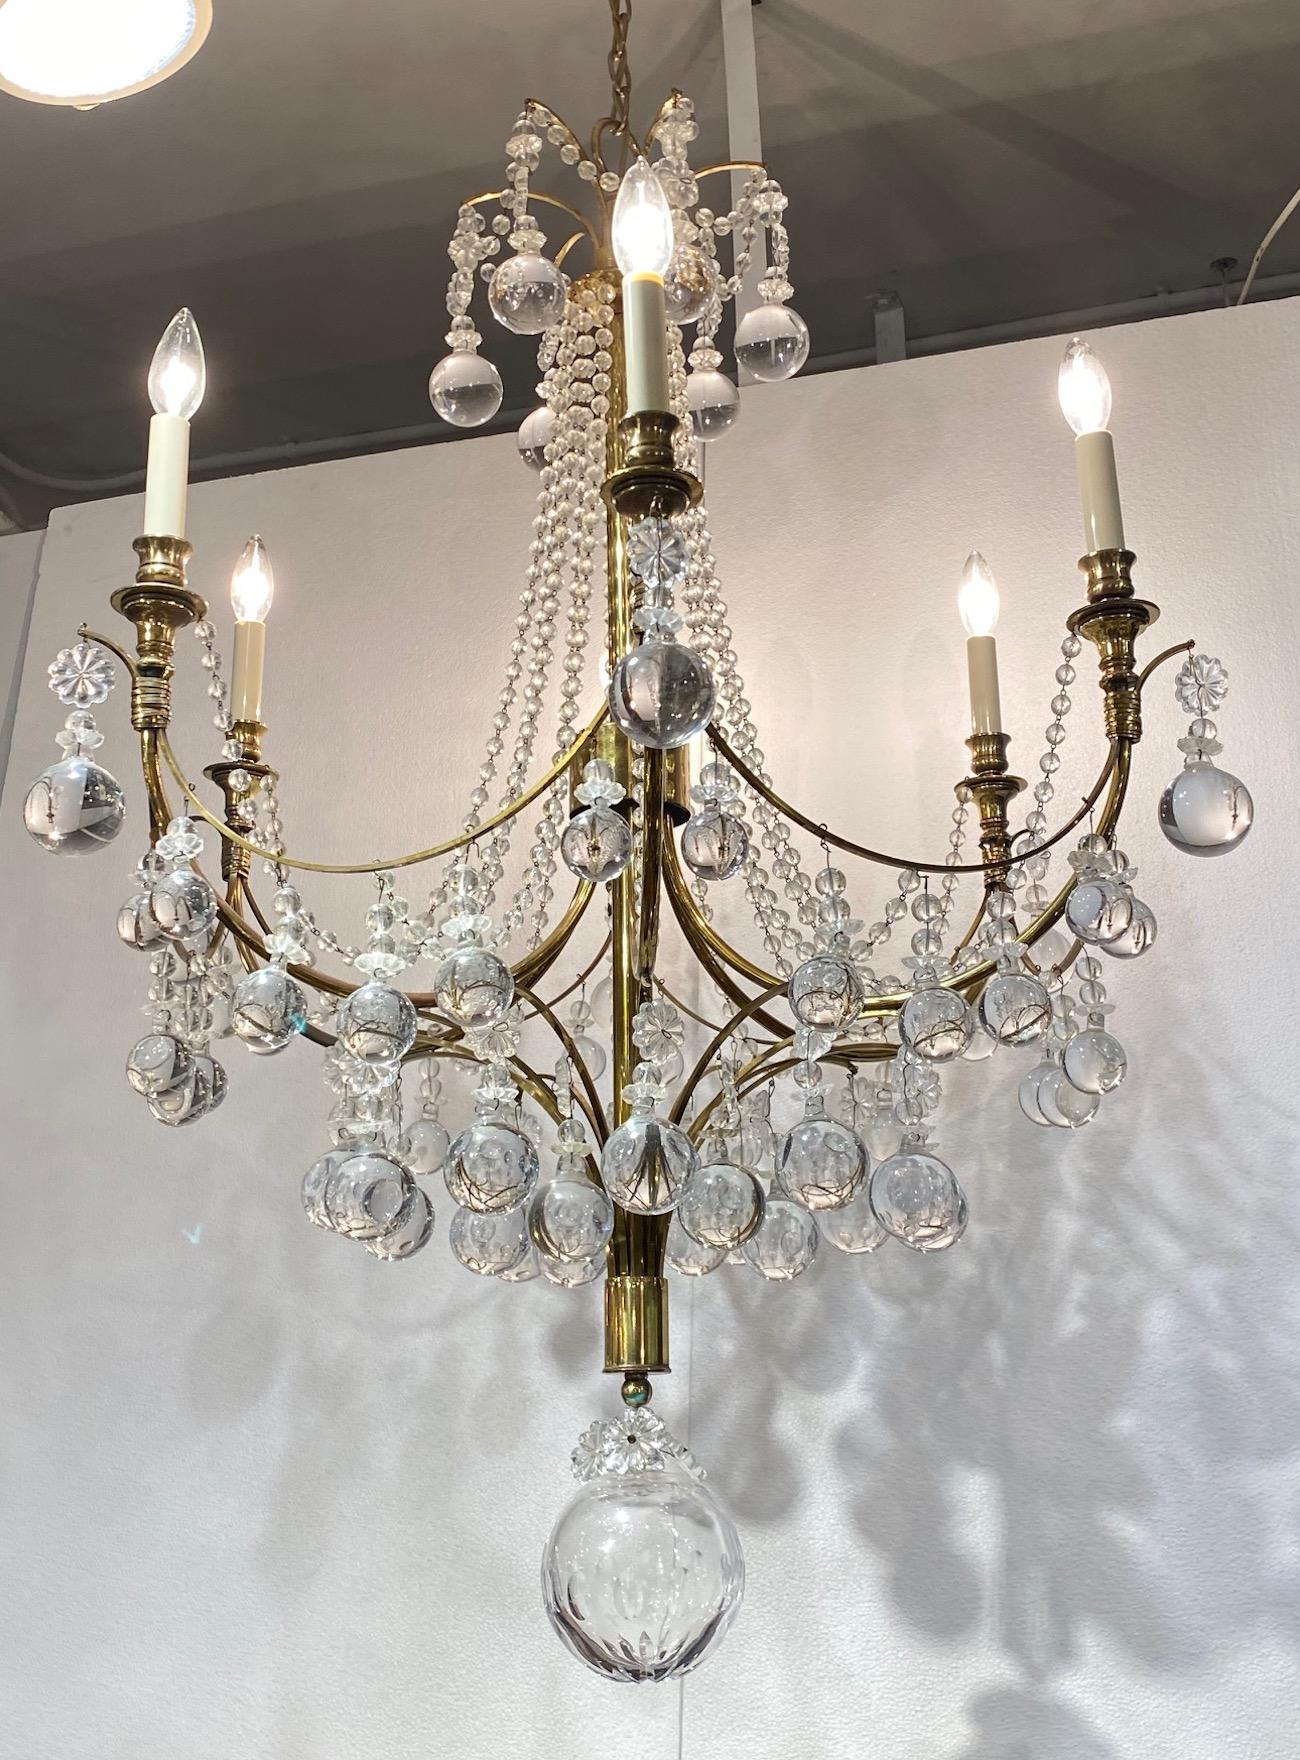 An elegant and large 1950s Hollywood Regency six light chandelier in the style of American designer Tommi Parzinger. Brass with cut crystal bead swags, glass ball drops and rosettes. Lovely attention to detail with wrapped brass band ornament below